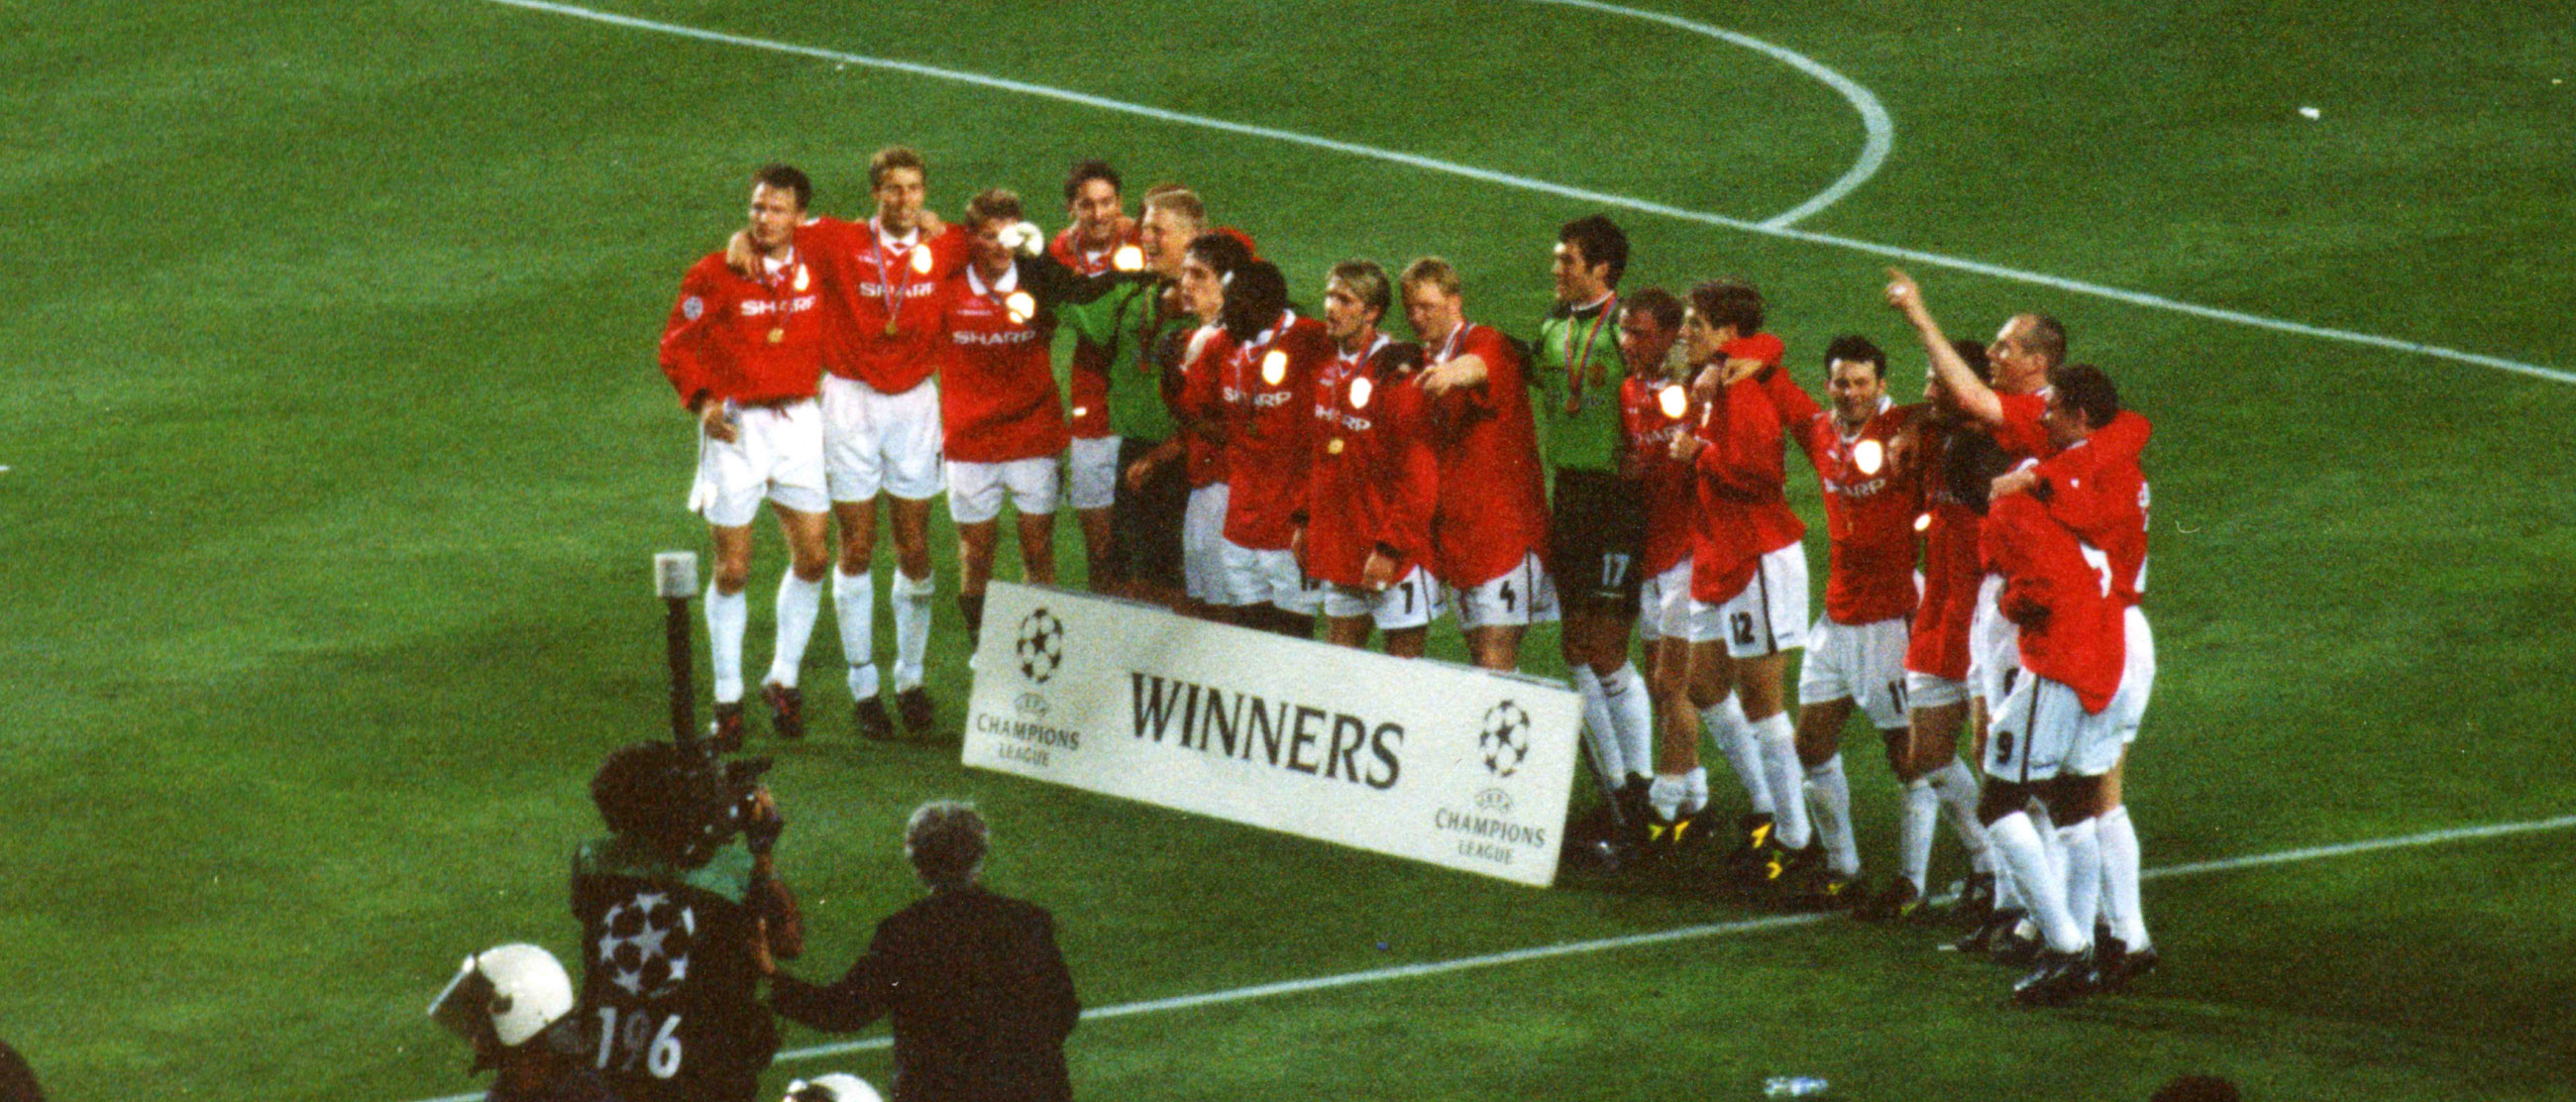 Manchester United winner of the 1998-1999 UEFA Champions League